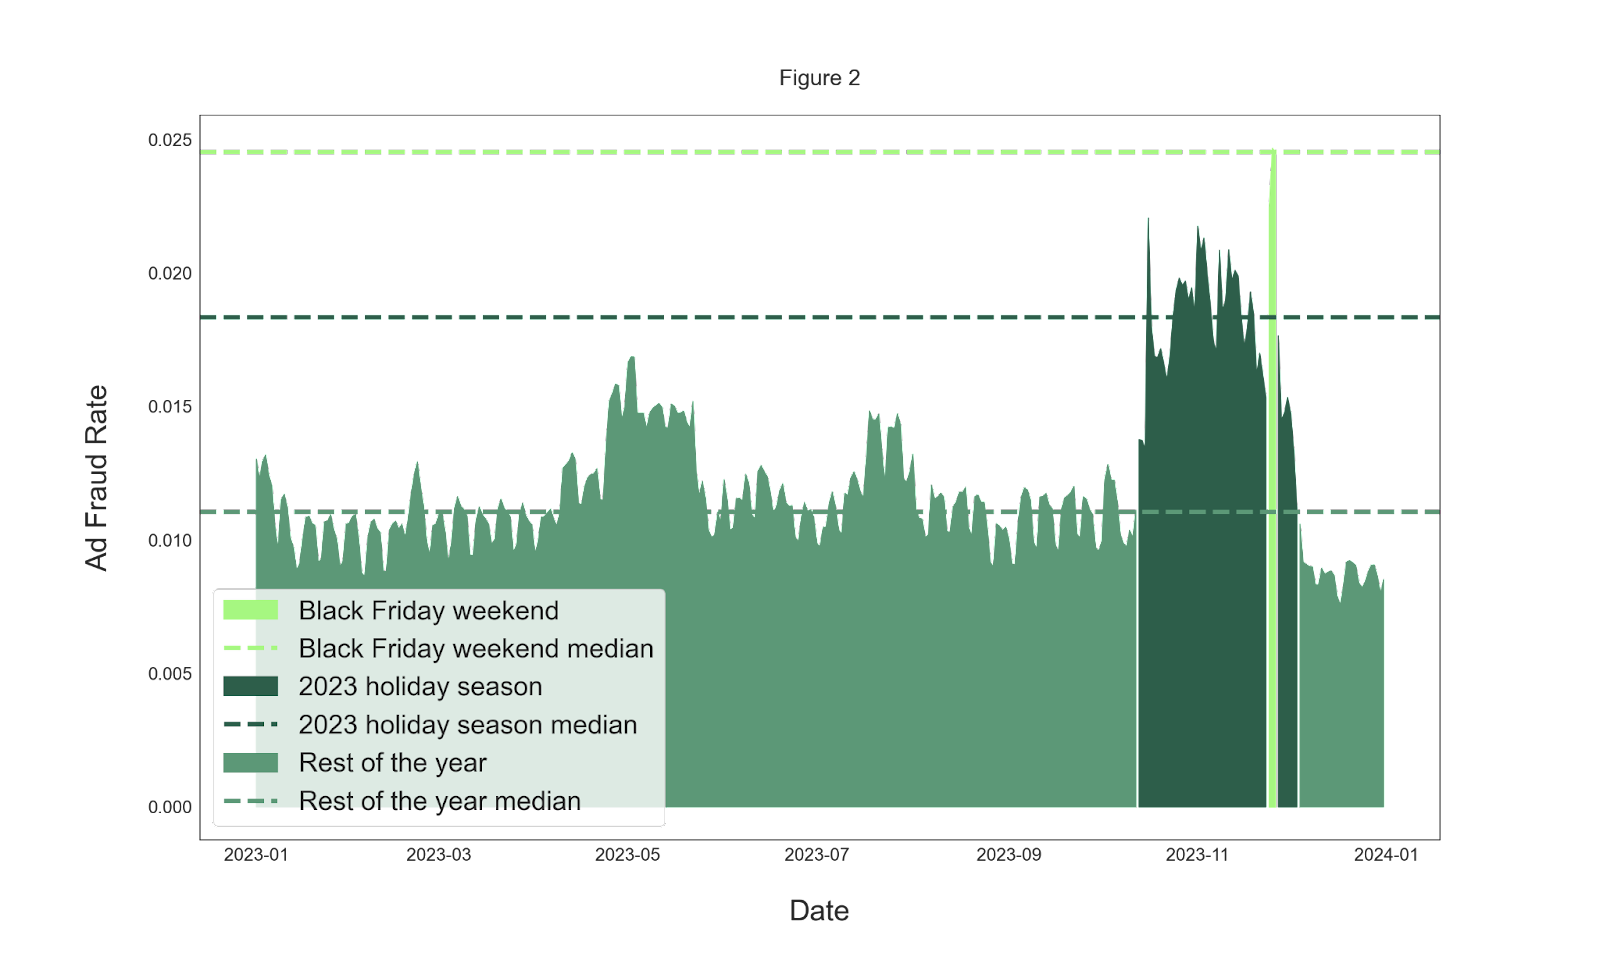 The graph below shows that ad fraud peaks during November 24, 25, and 26 — also known as 2023’s Black Friday weekend.